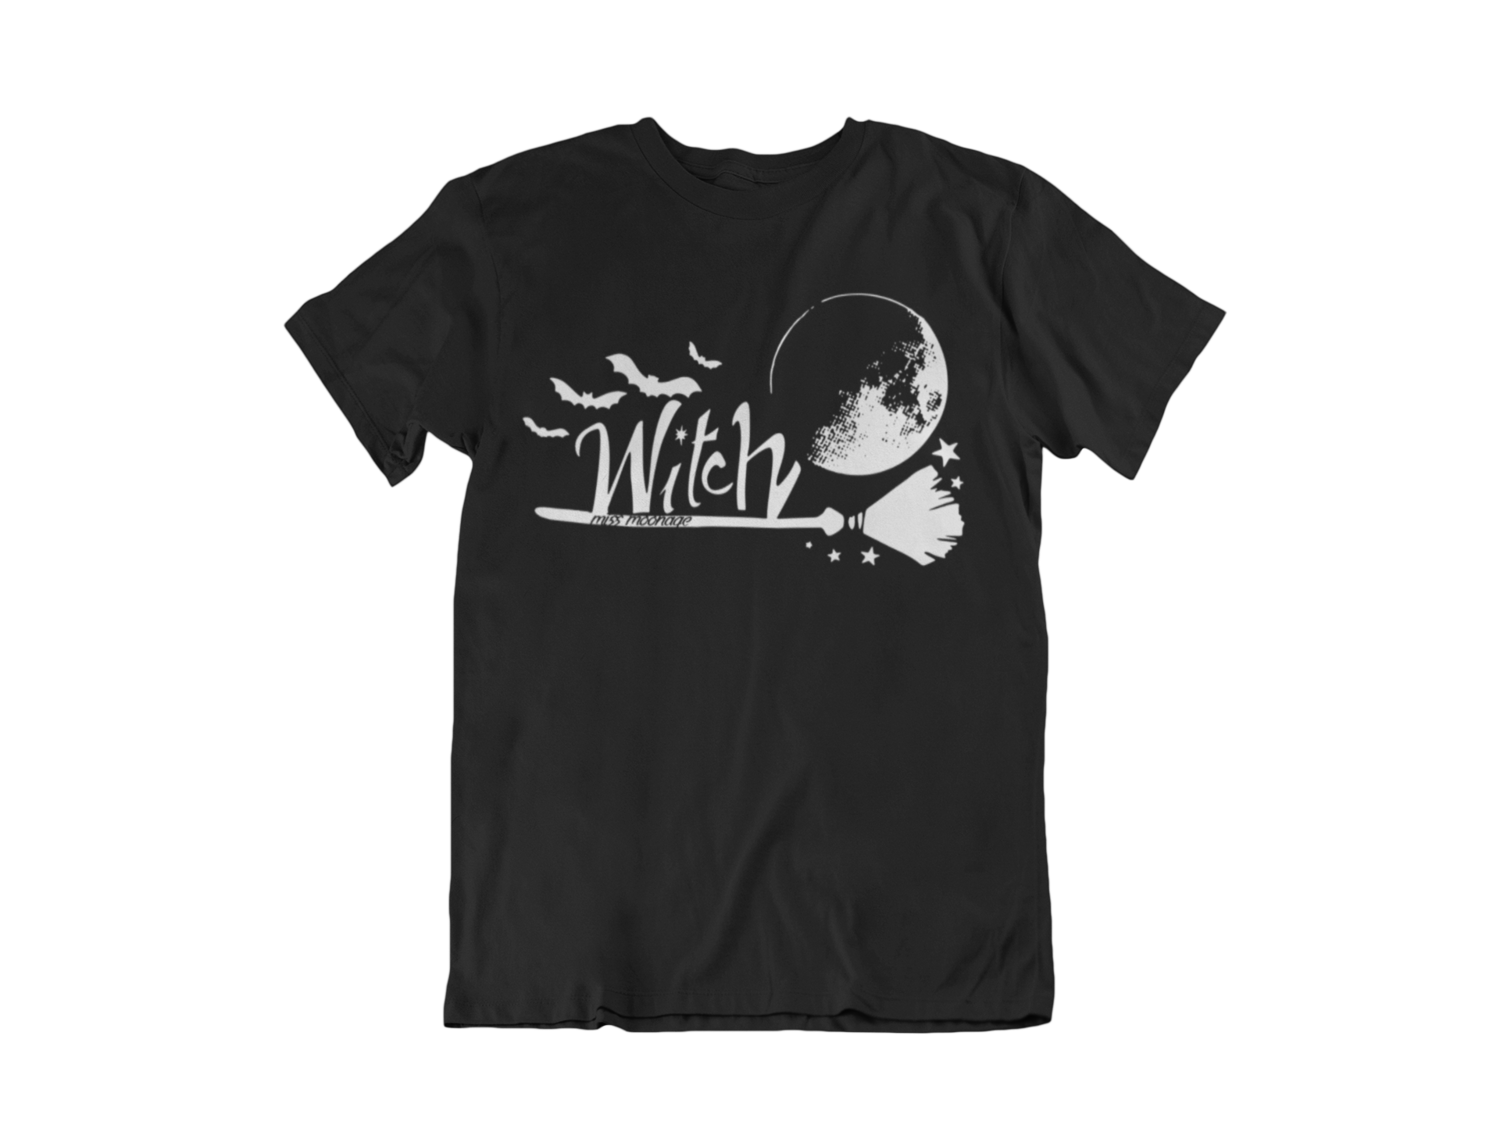 WITCH by MISS MOONAGE tshirt for MEN